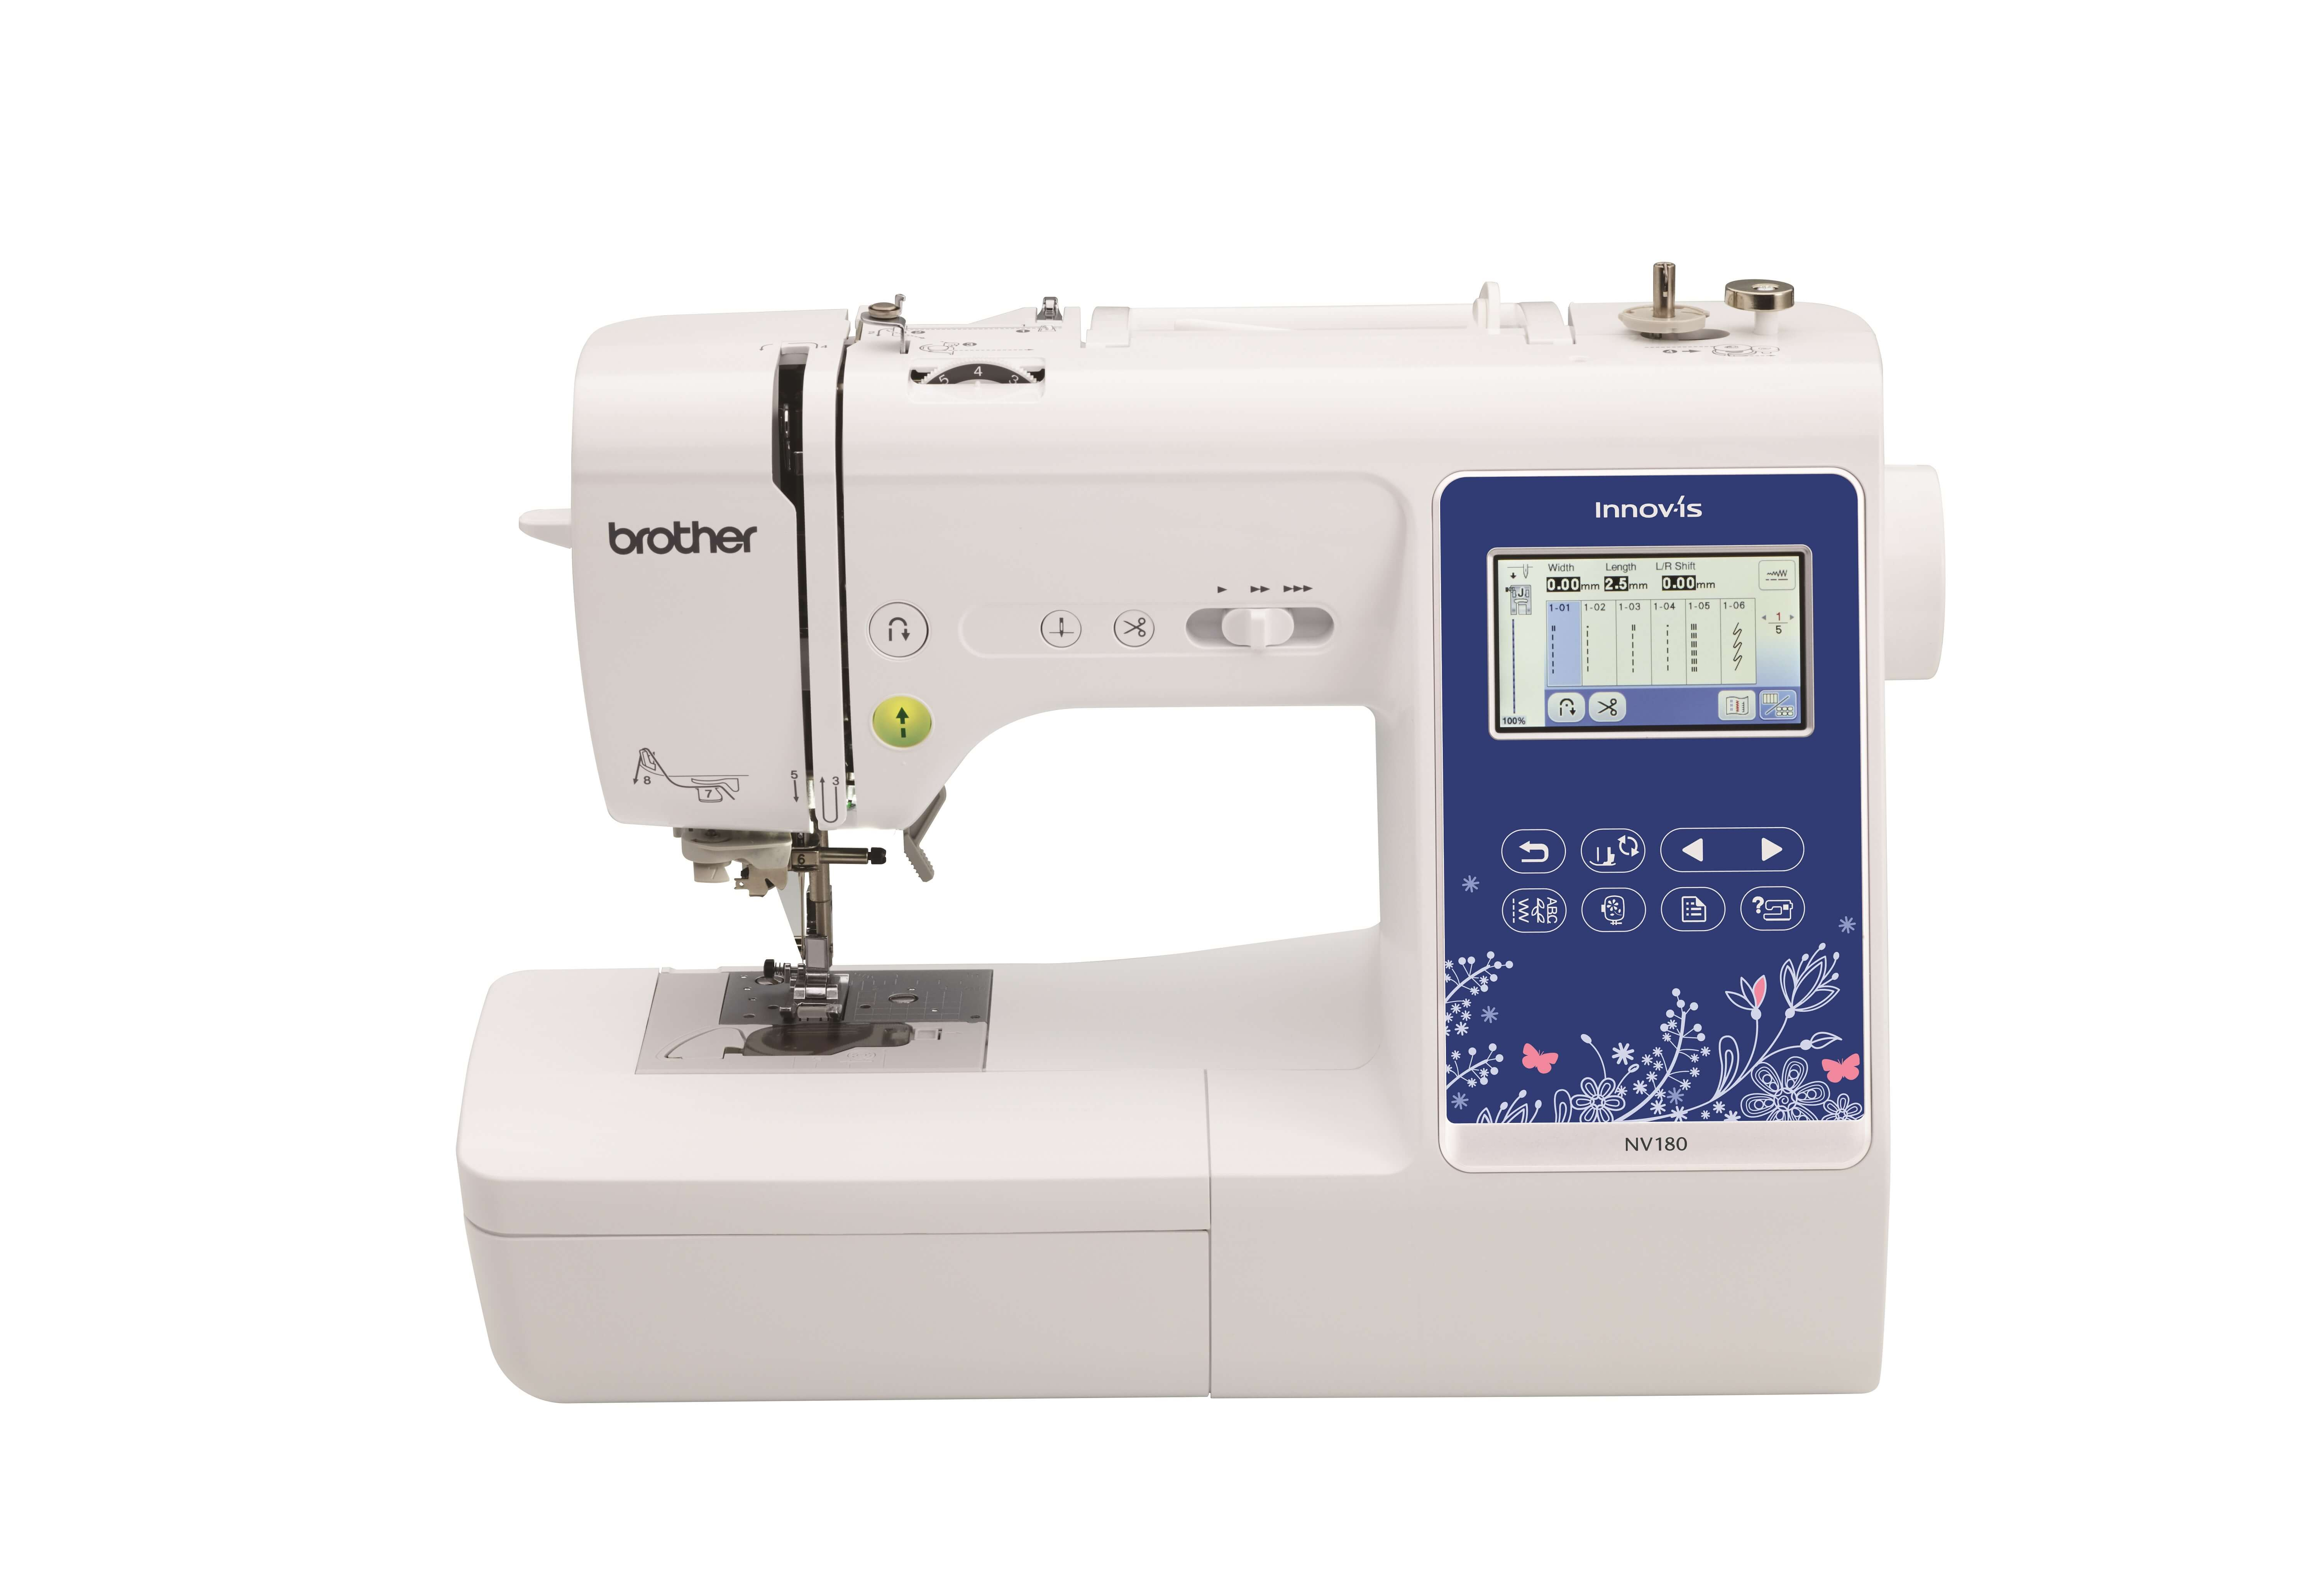 Brother Sewing Machine Embroidery Patterns Innov Is Nv180 Brother Gulf